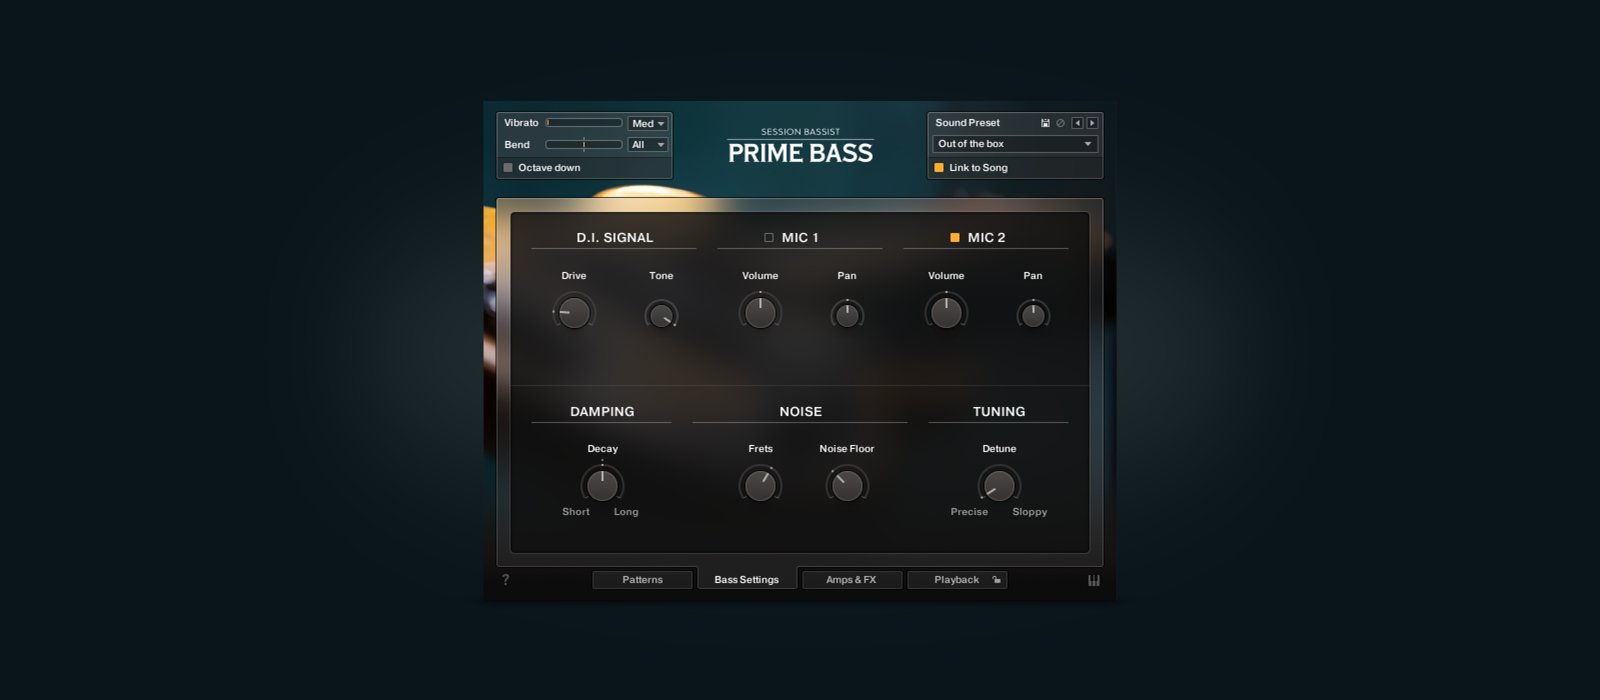 img-ce-gallery-prime-bass-product-page-03-gallery-03-settings-419a1b8baea998bef95aac325c609a87-d.jpg